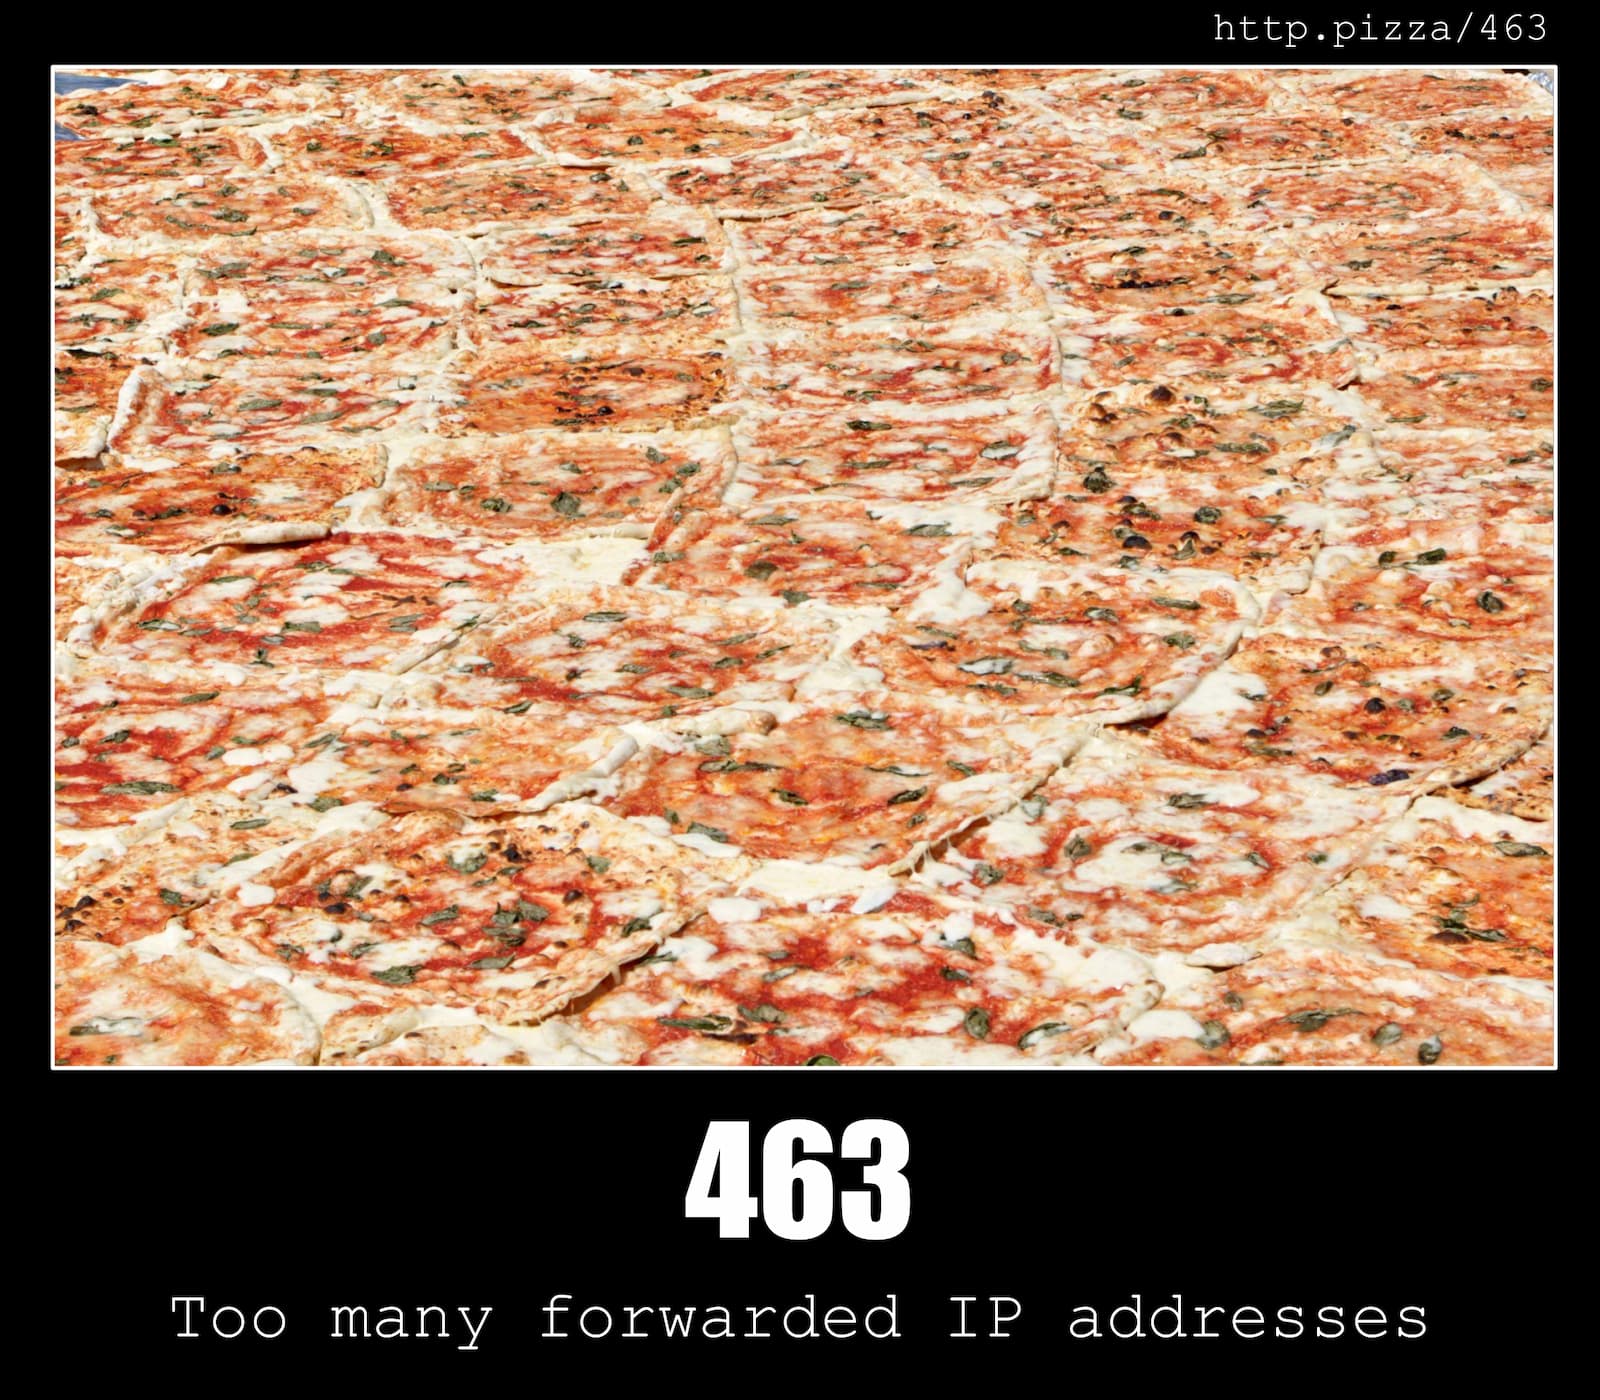 HTTP Status Code 463 Too many forwarded IP addresses & Pizzas